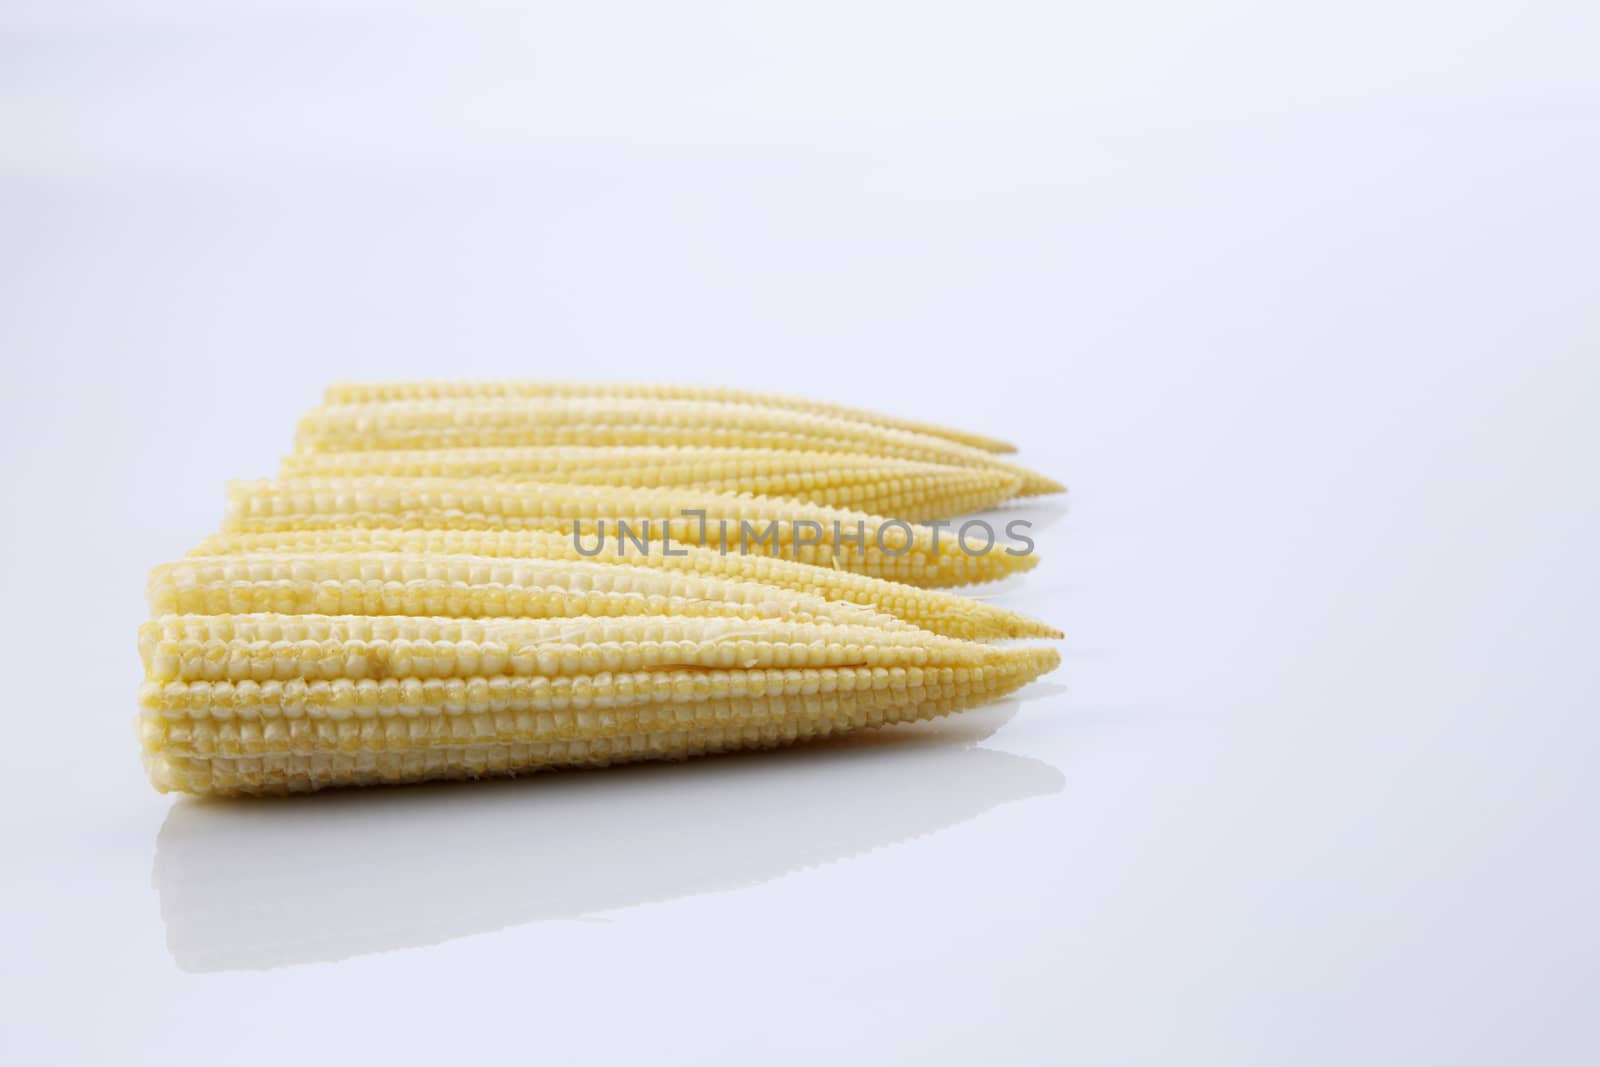 Baby corn on a white background, close-up